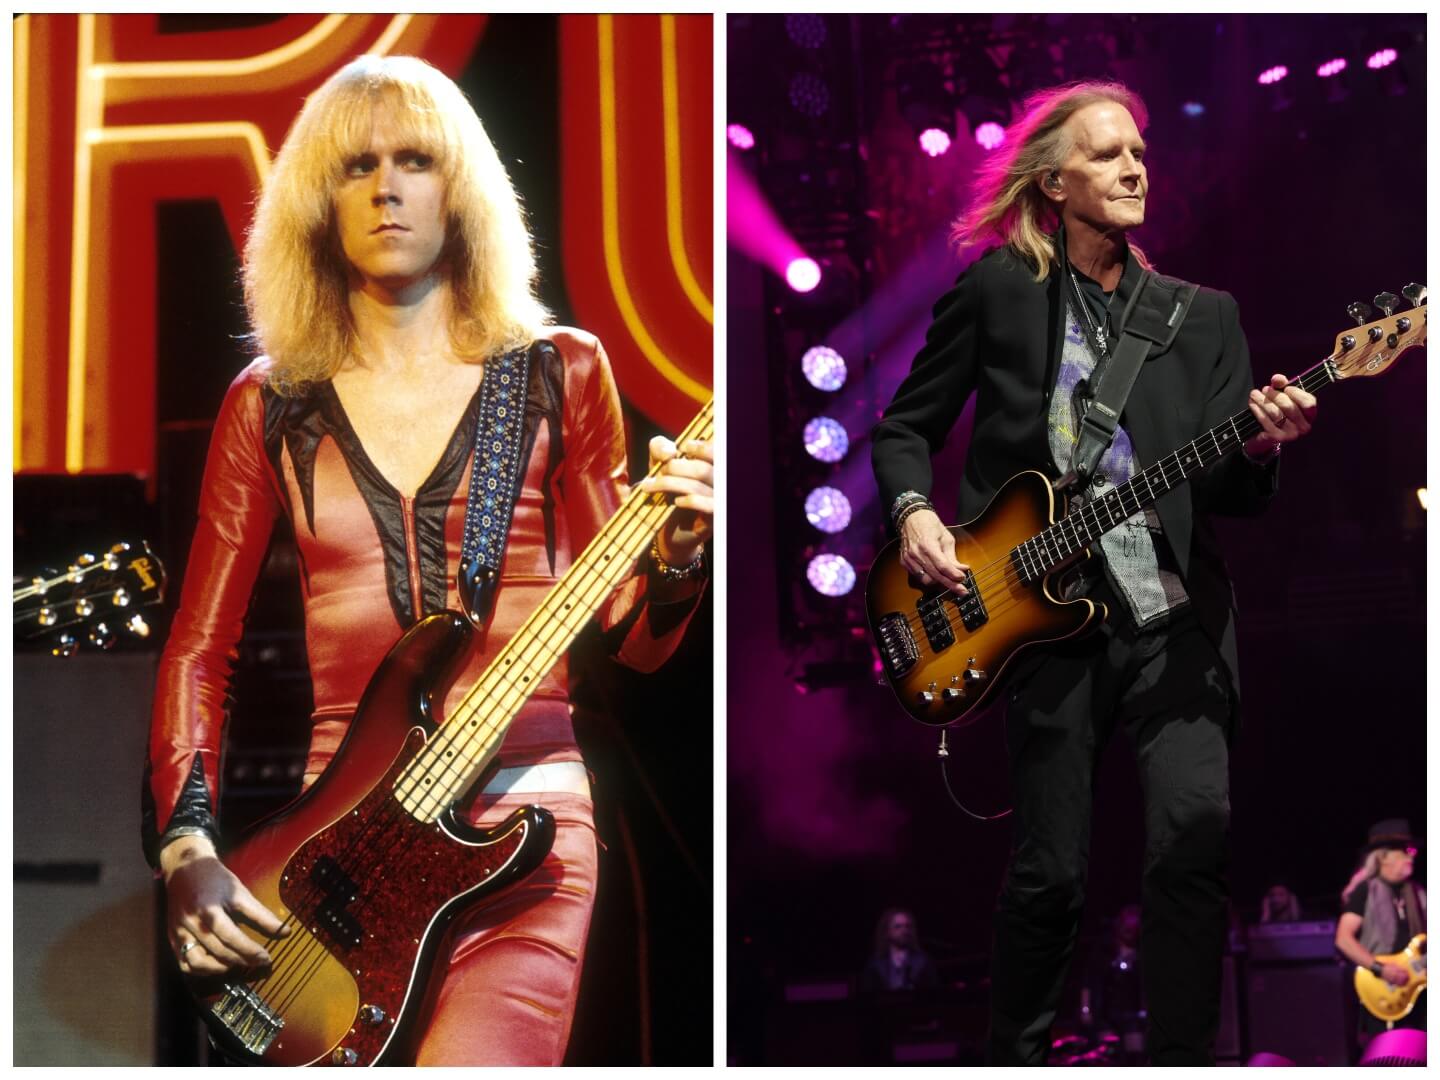 In 1974, Tom Hamilton wears red and holds a guitar. Tom Hamilton wears black and holds a guitar in 2023.